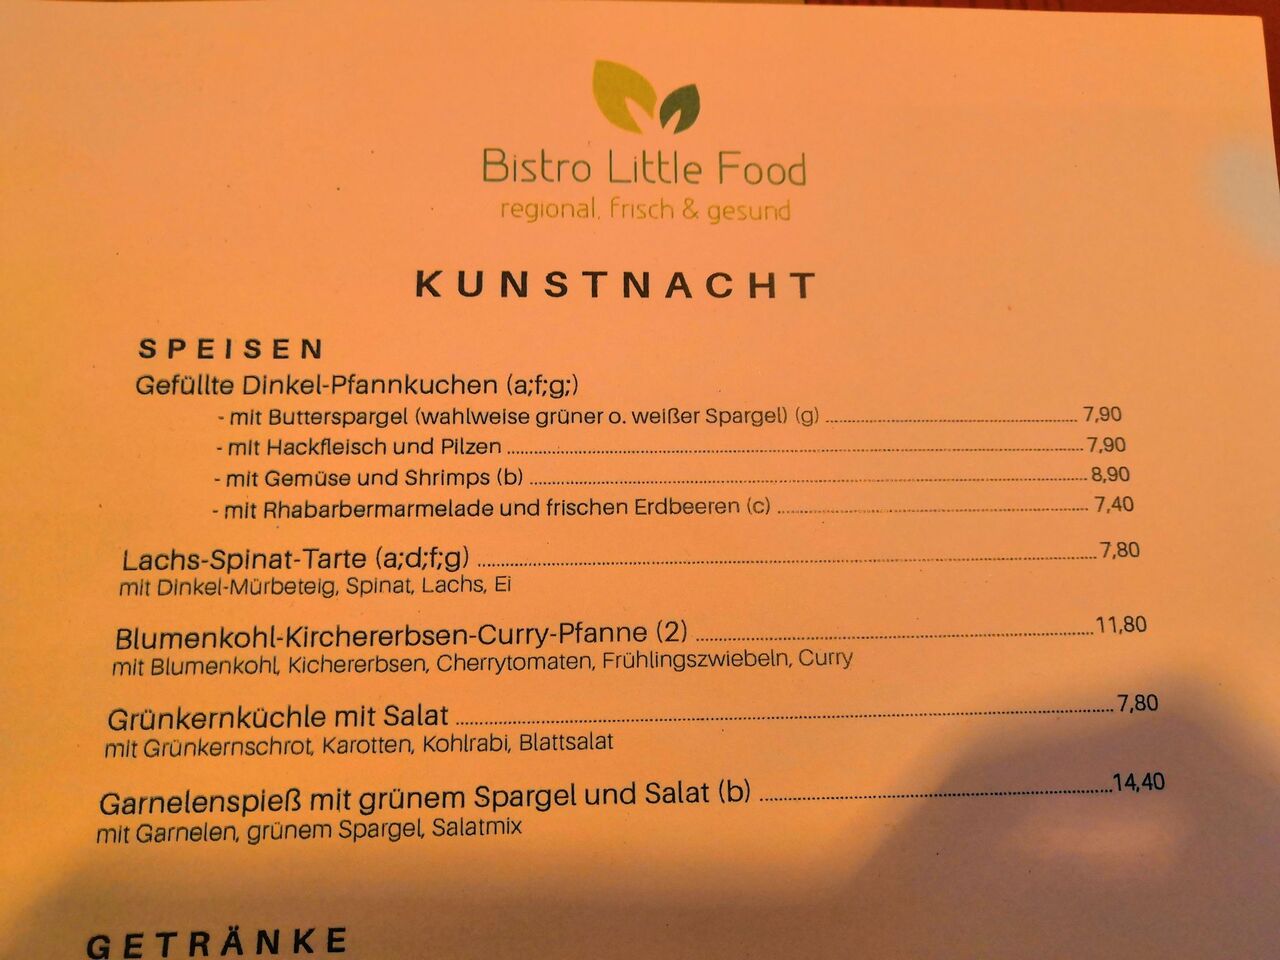 A photo of Bistro Little Food